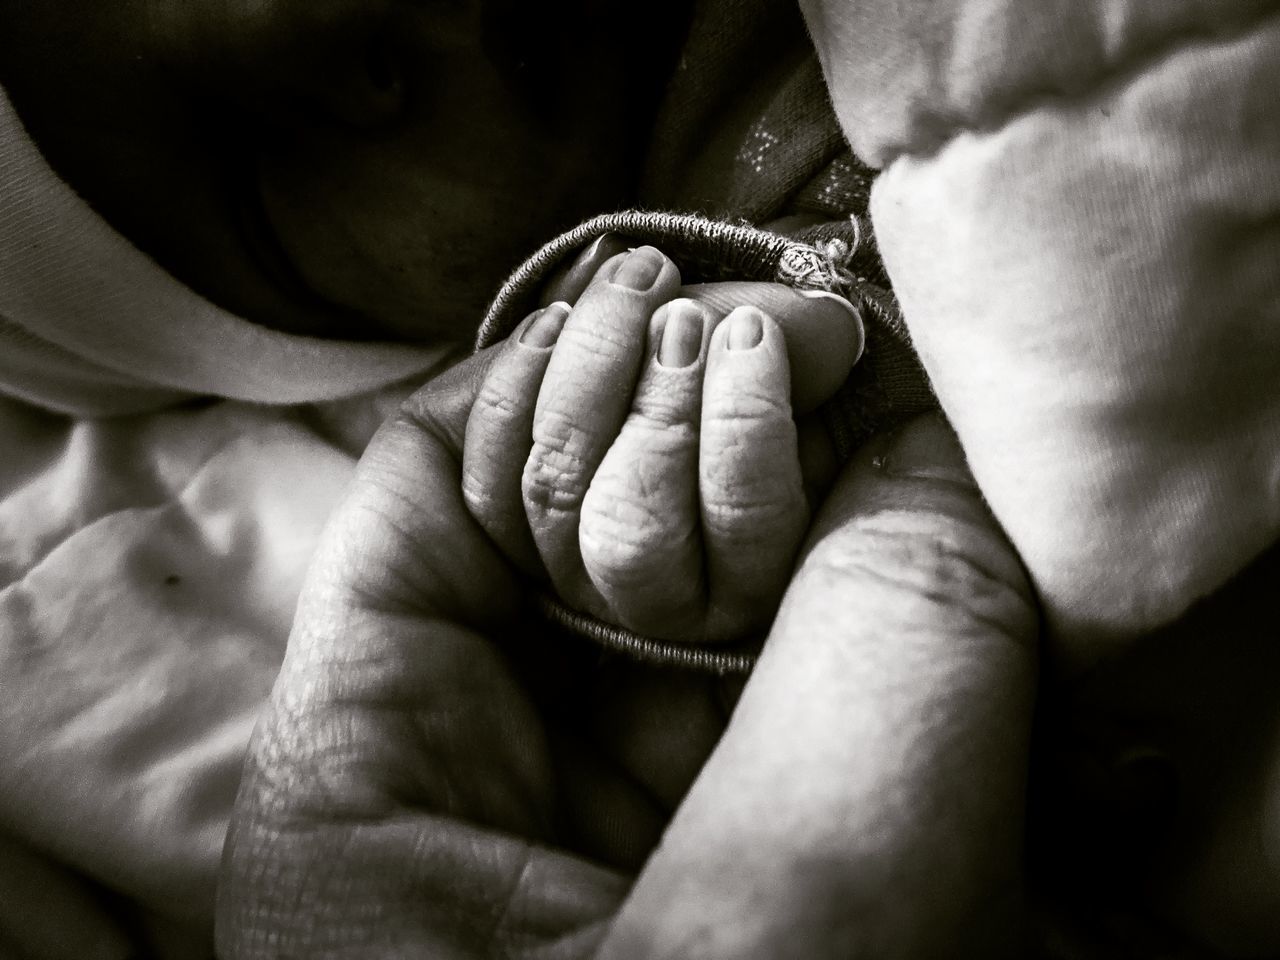 hand, human hand, human body part, close-up, family, love, real people, two people, togetherness, positive emotion, bonding, baby, people, body part, young, babyhood, child, care, holding, adult, finger